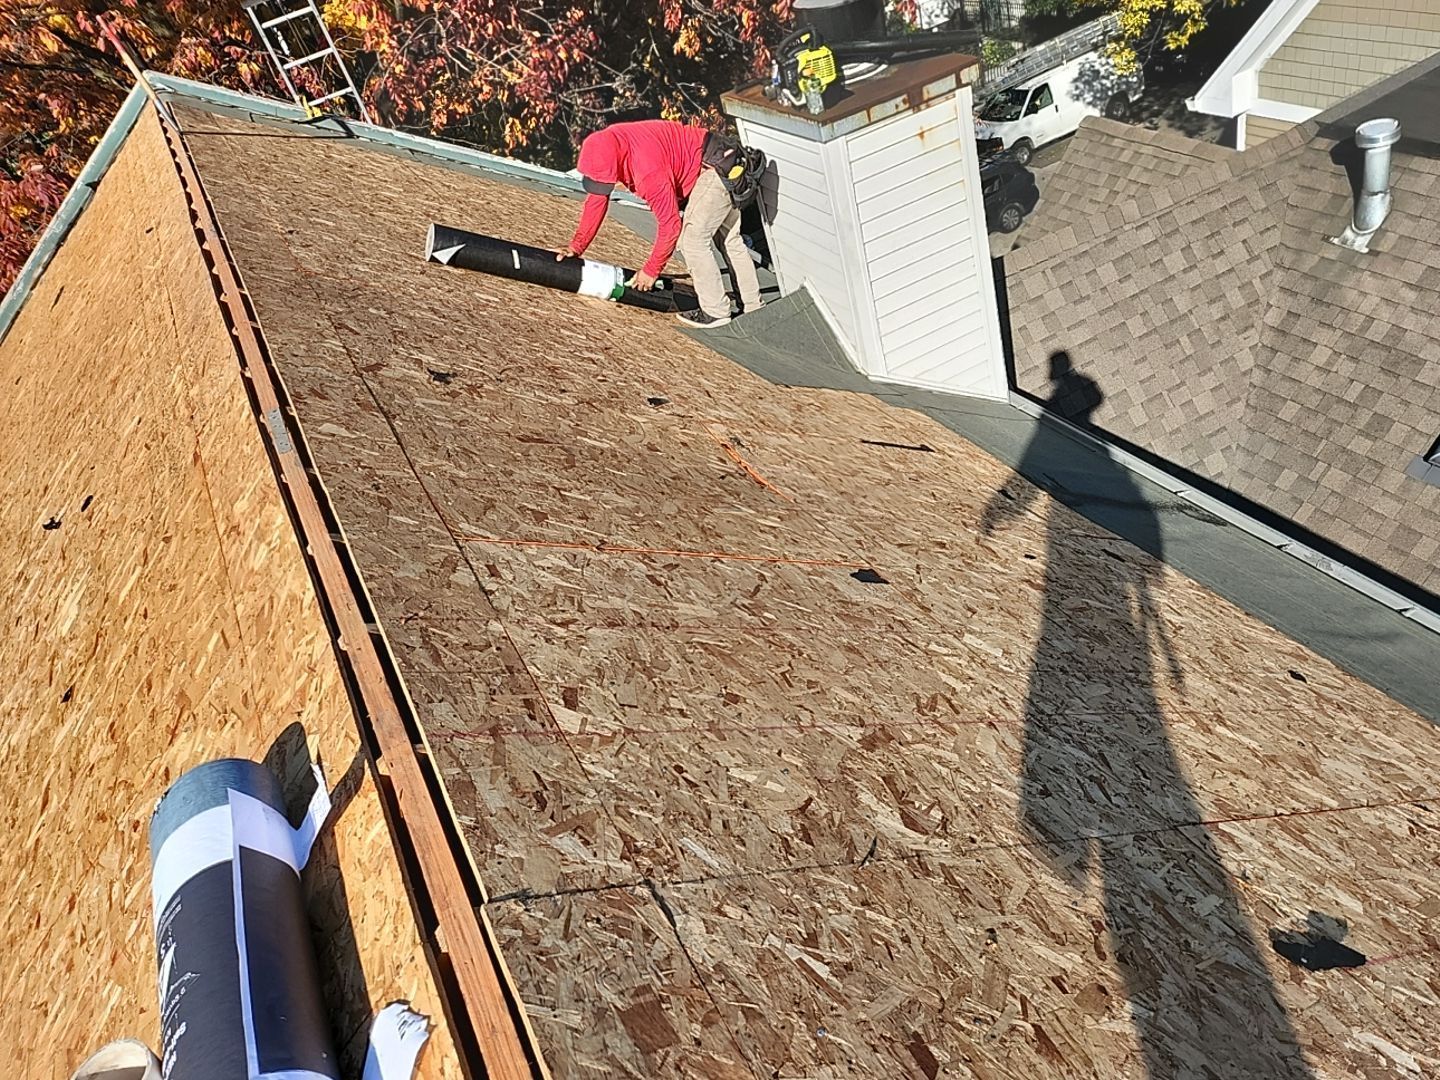 A man is working on the roof of a house.